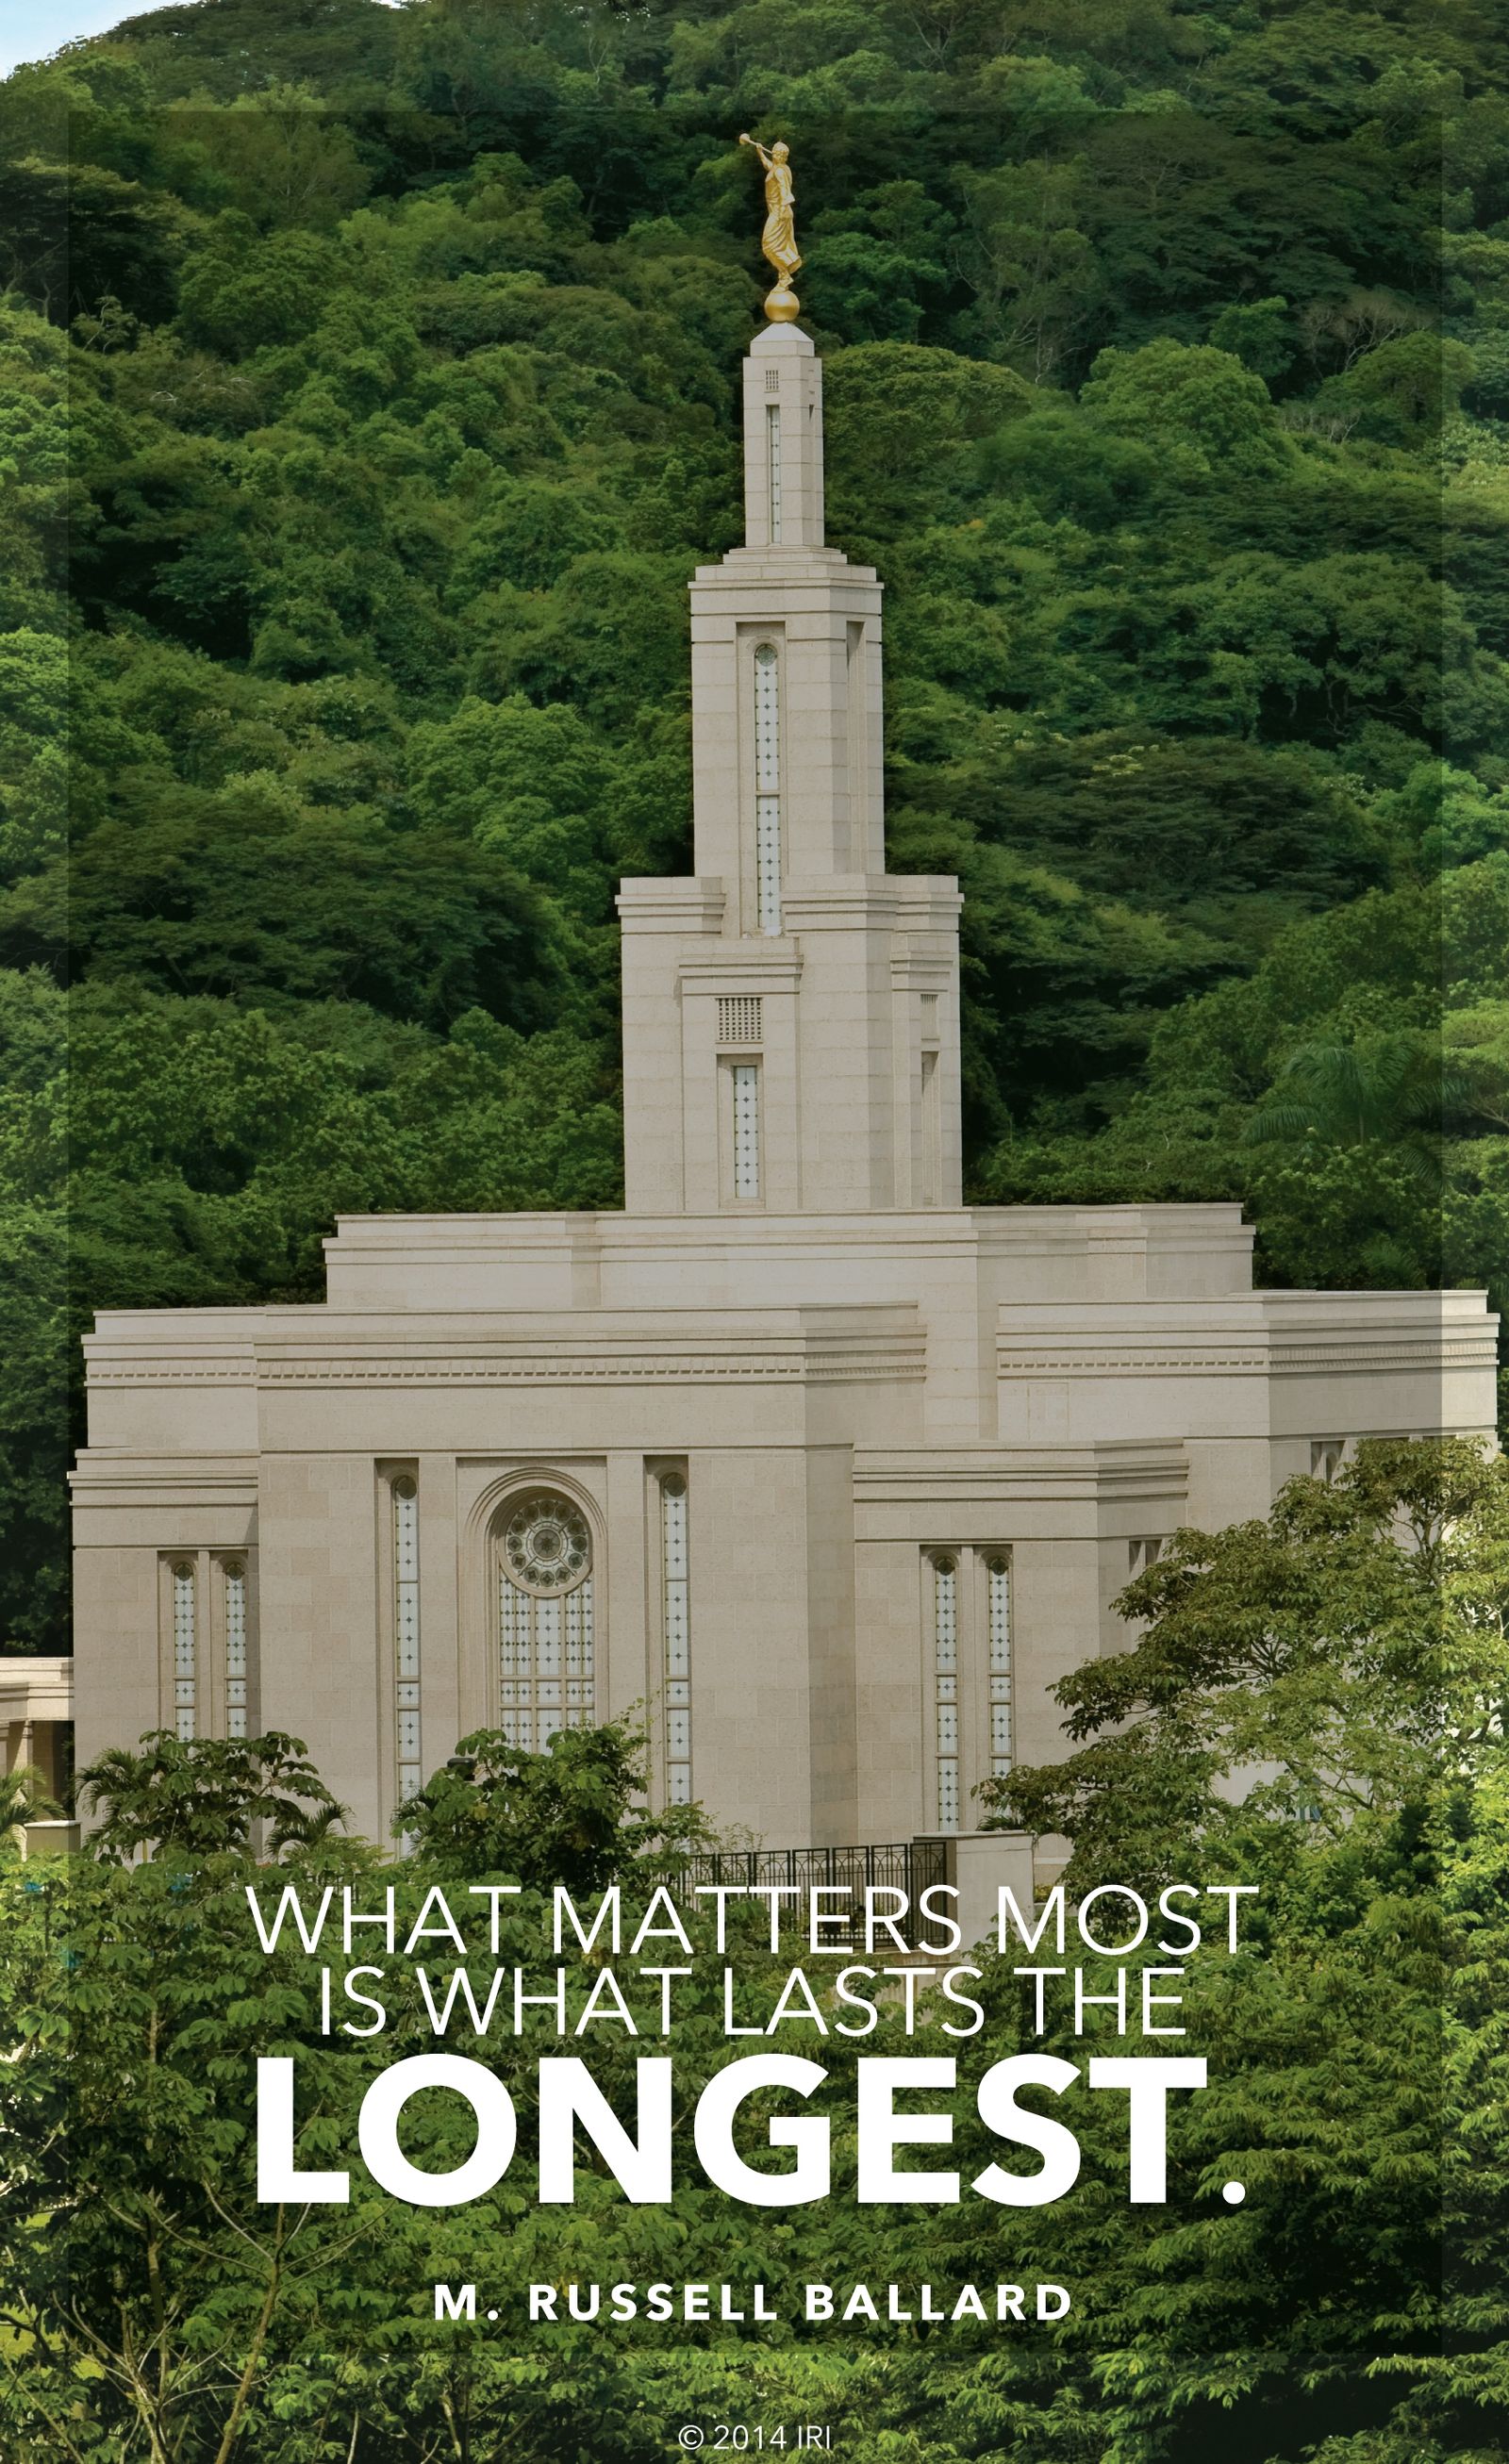 “What matters most is what lasts the longest.”—Elder M. Russell Ballard, “What Matters Most Is What Lasts Longest”